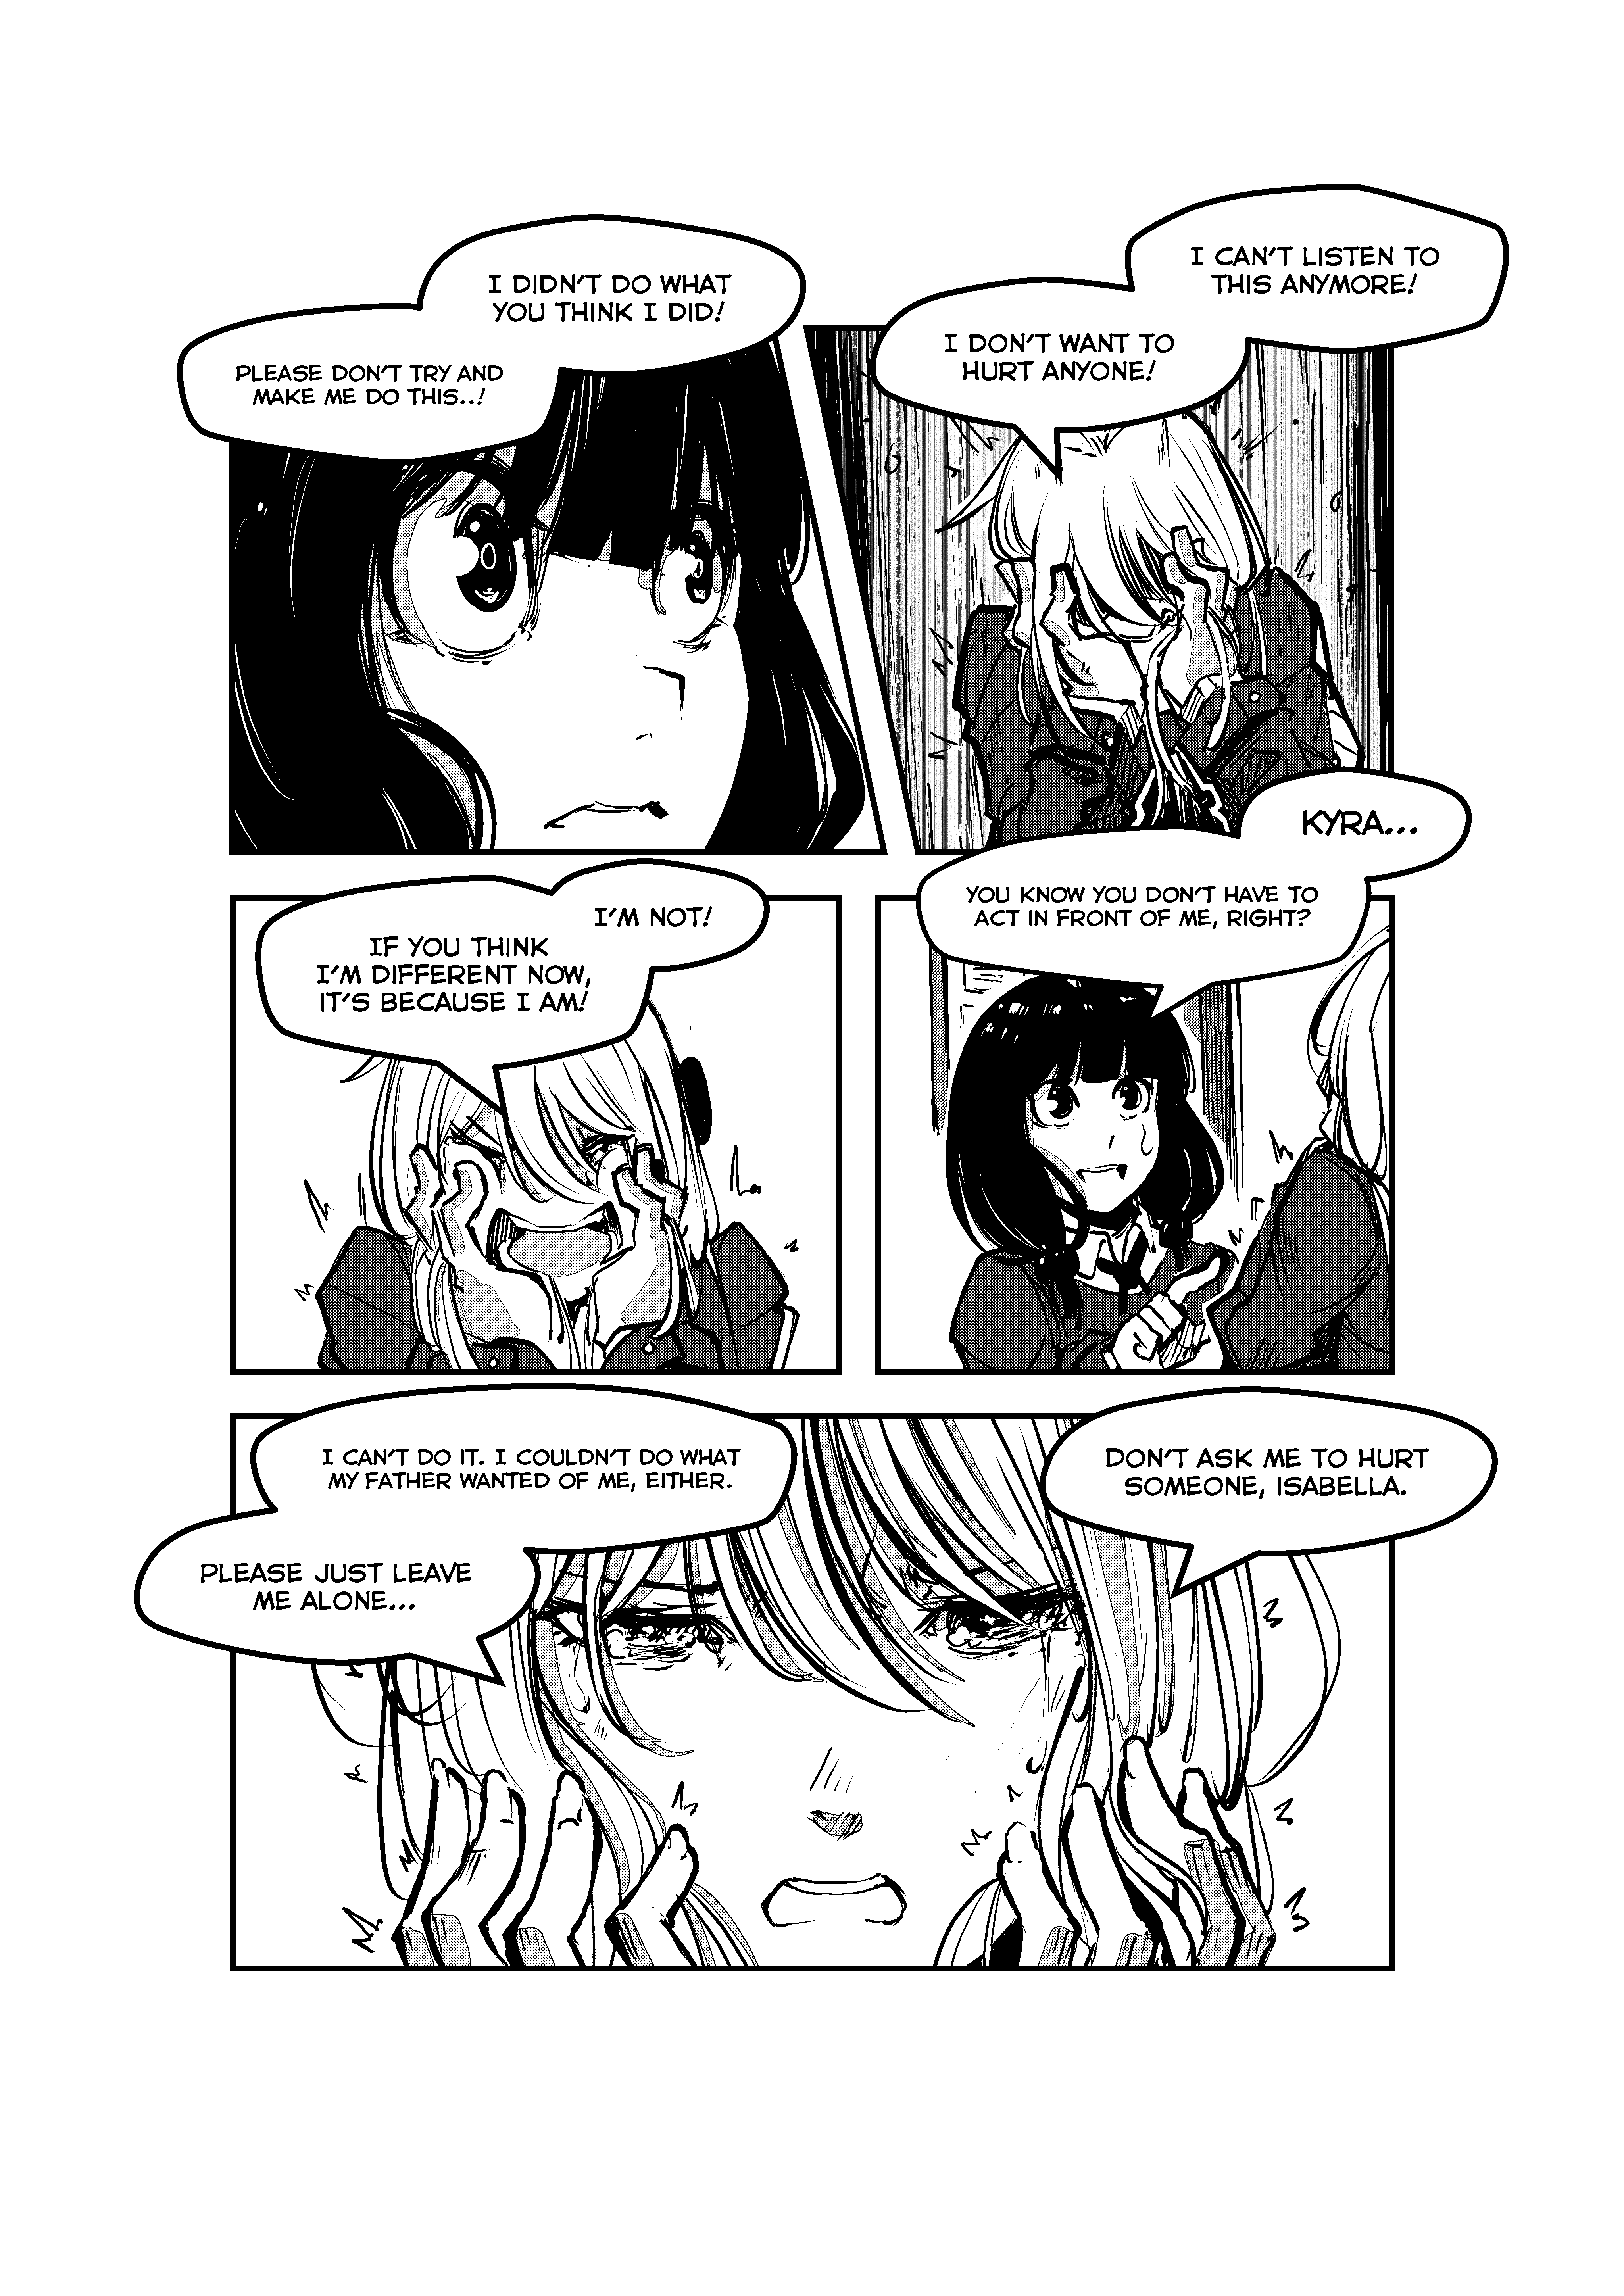 Opposites In Disguise - 21 page 13-ca6e5fa4